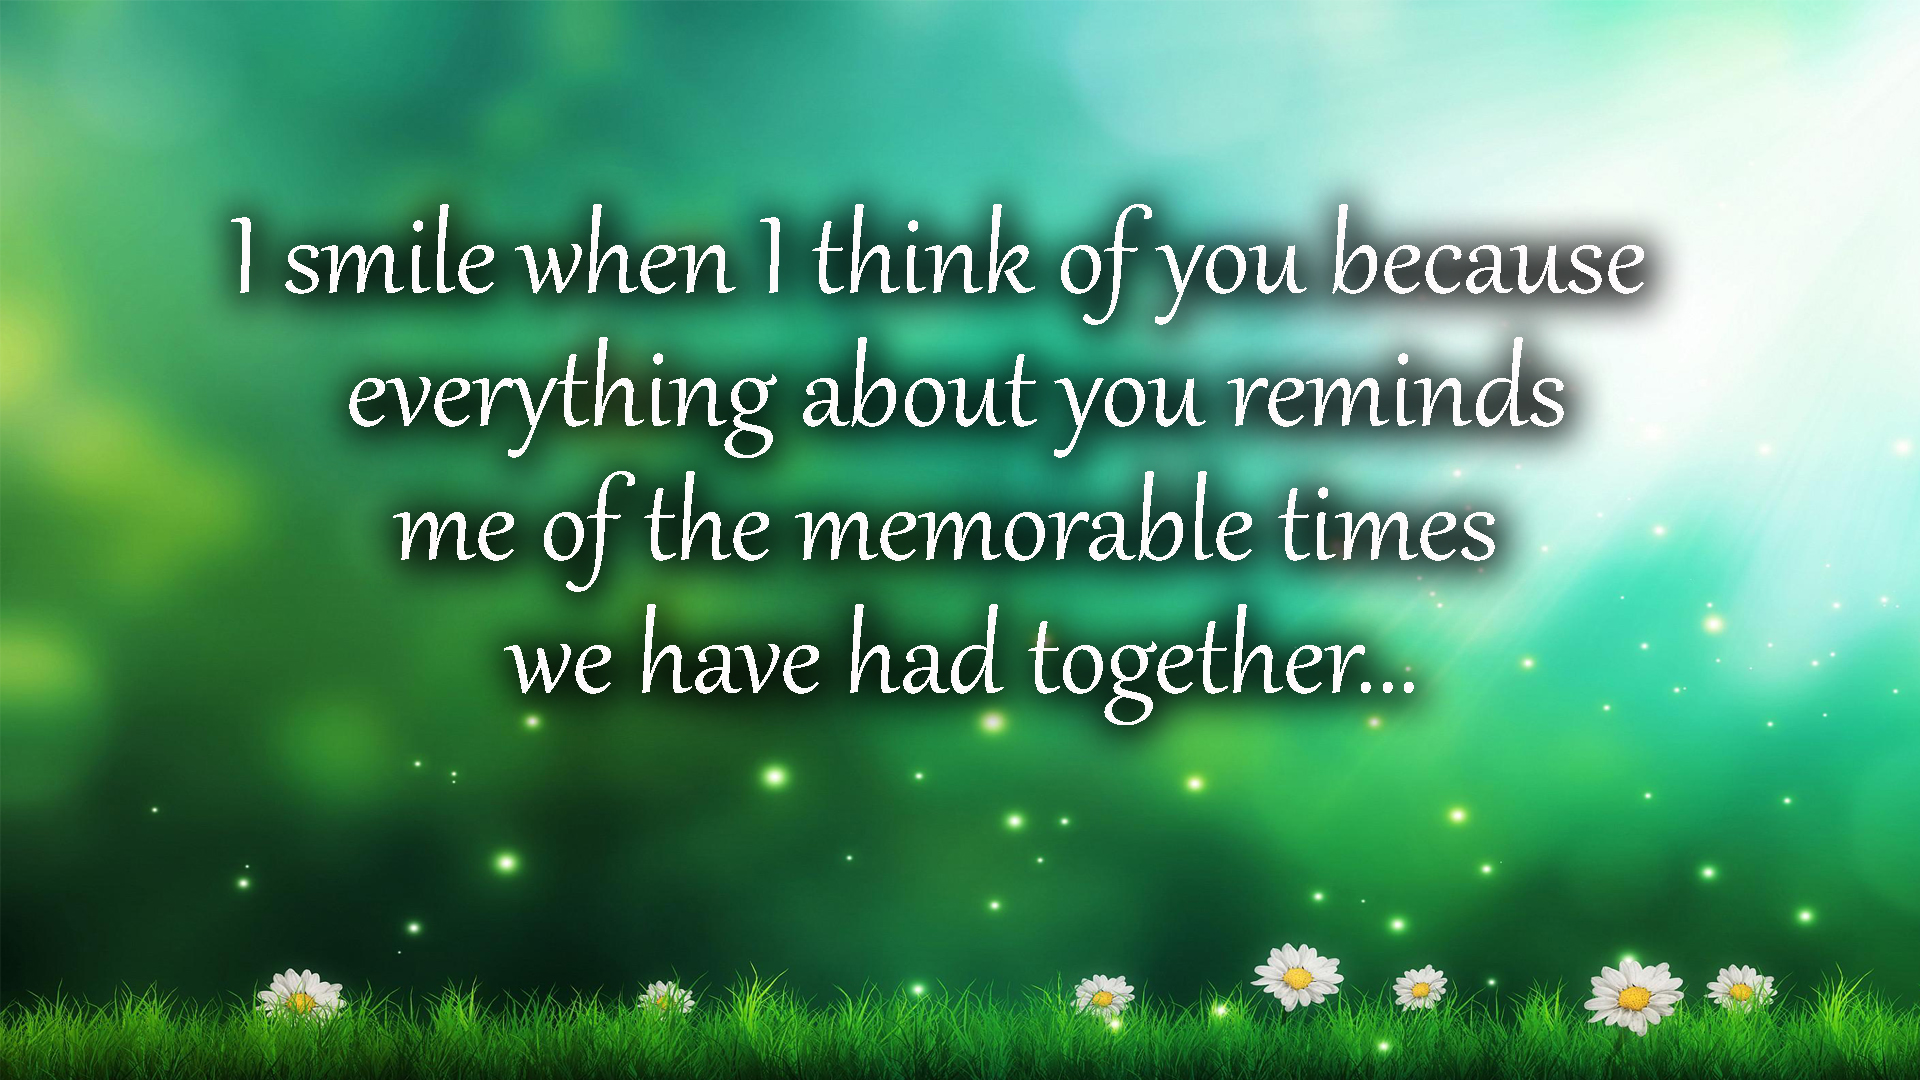 lovely quote about thinking of you